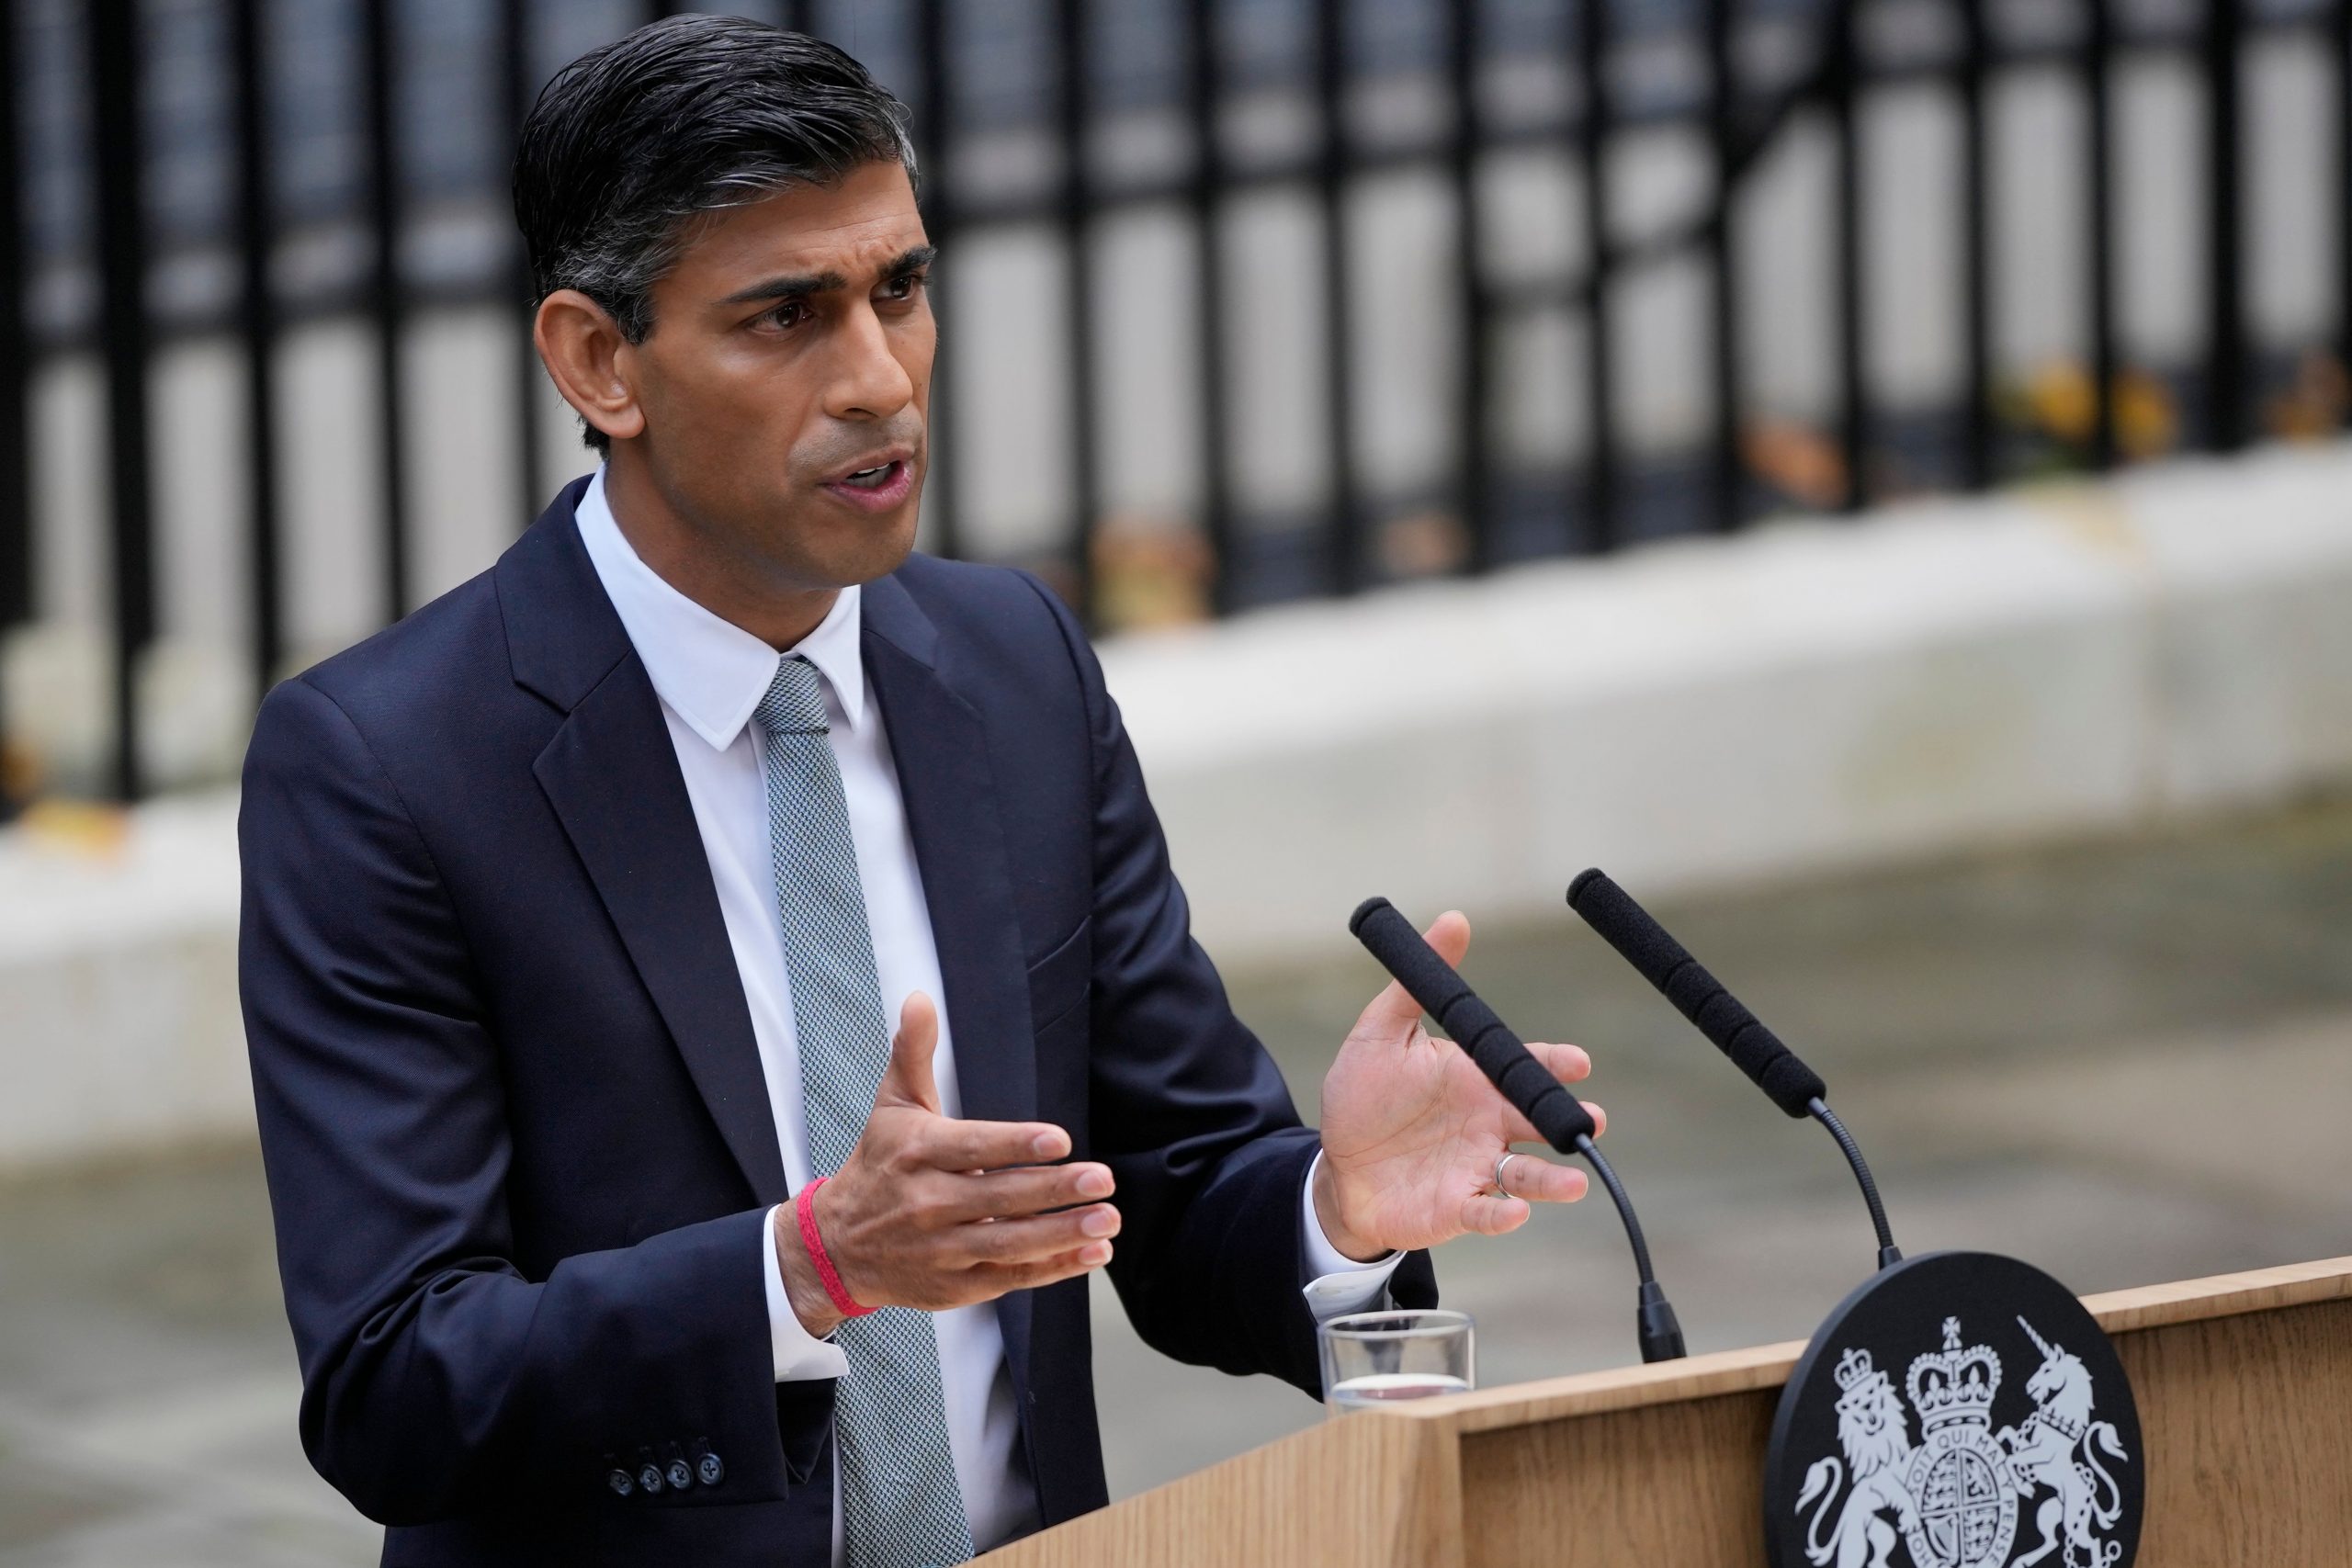 Rishi Sunak’s relatives in Punjab happy to see him become UK PM